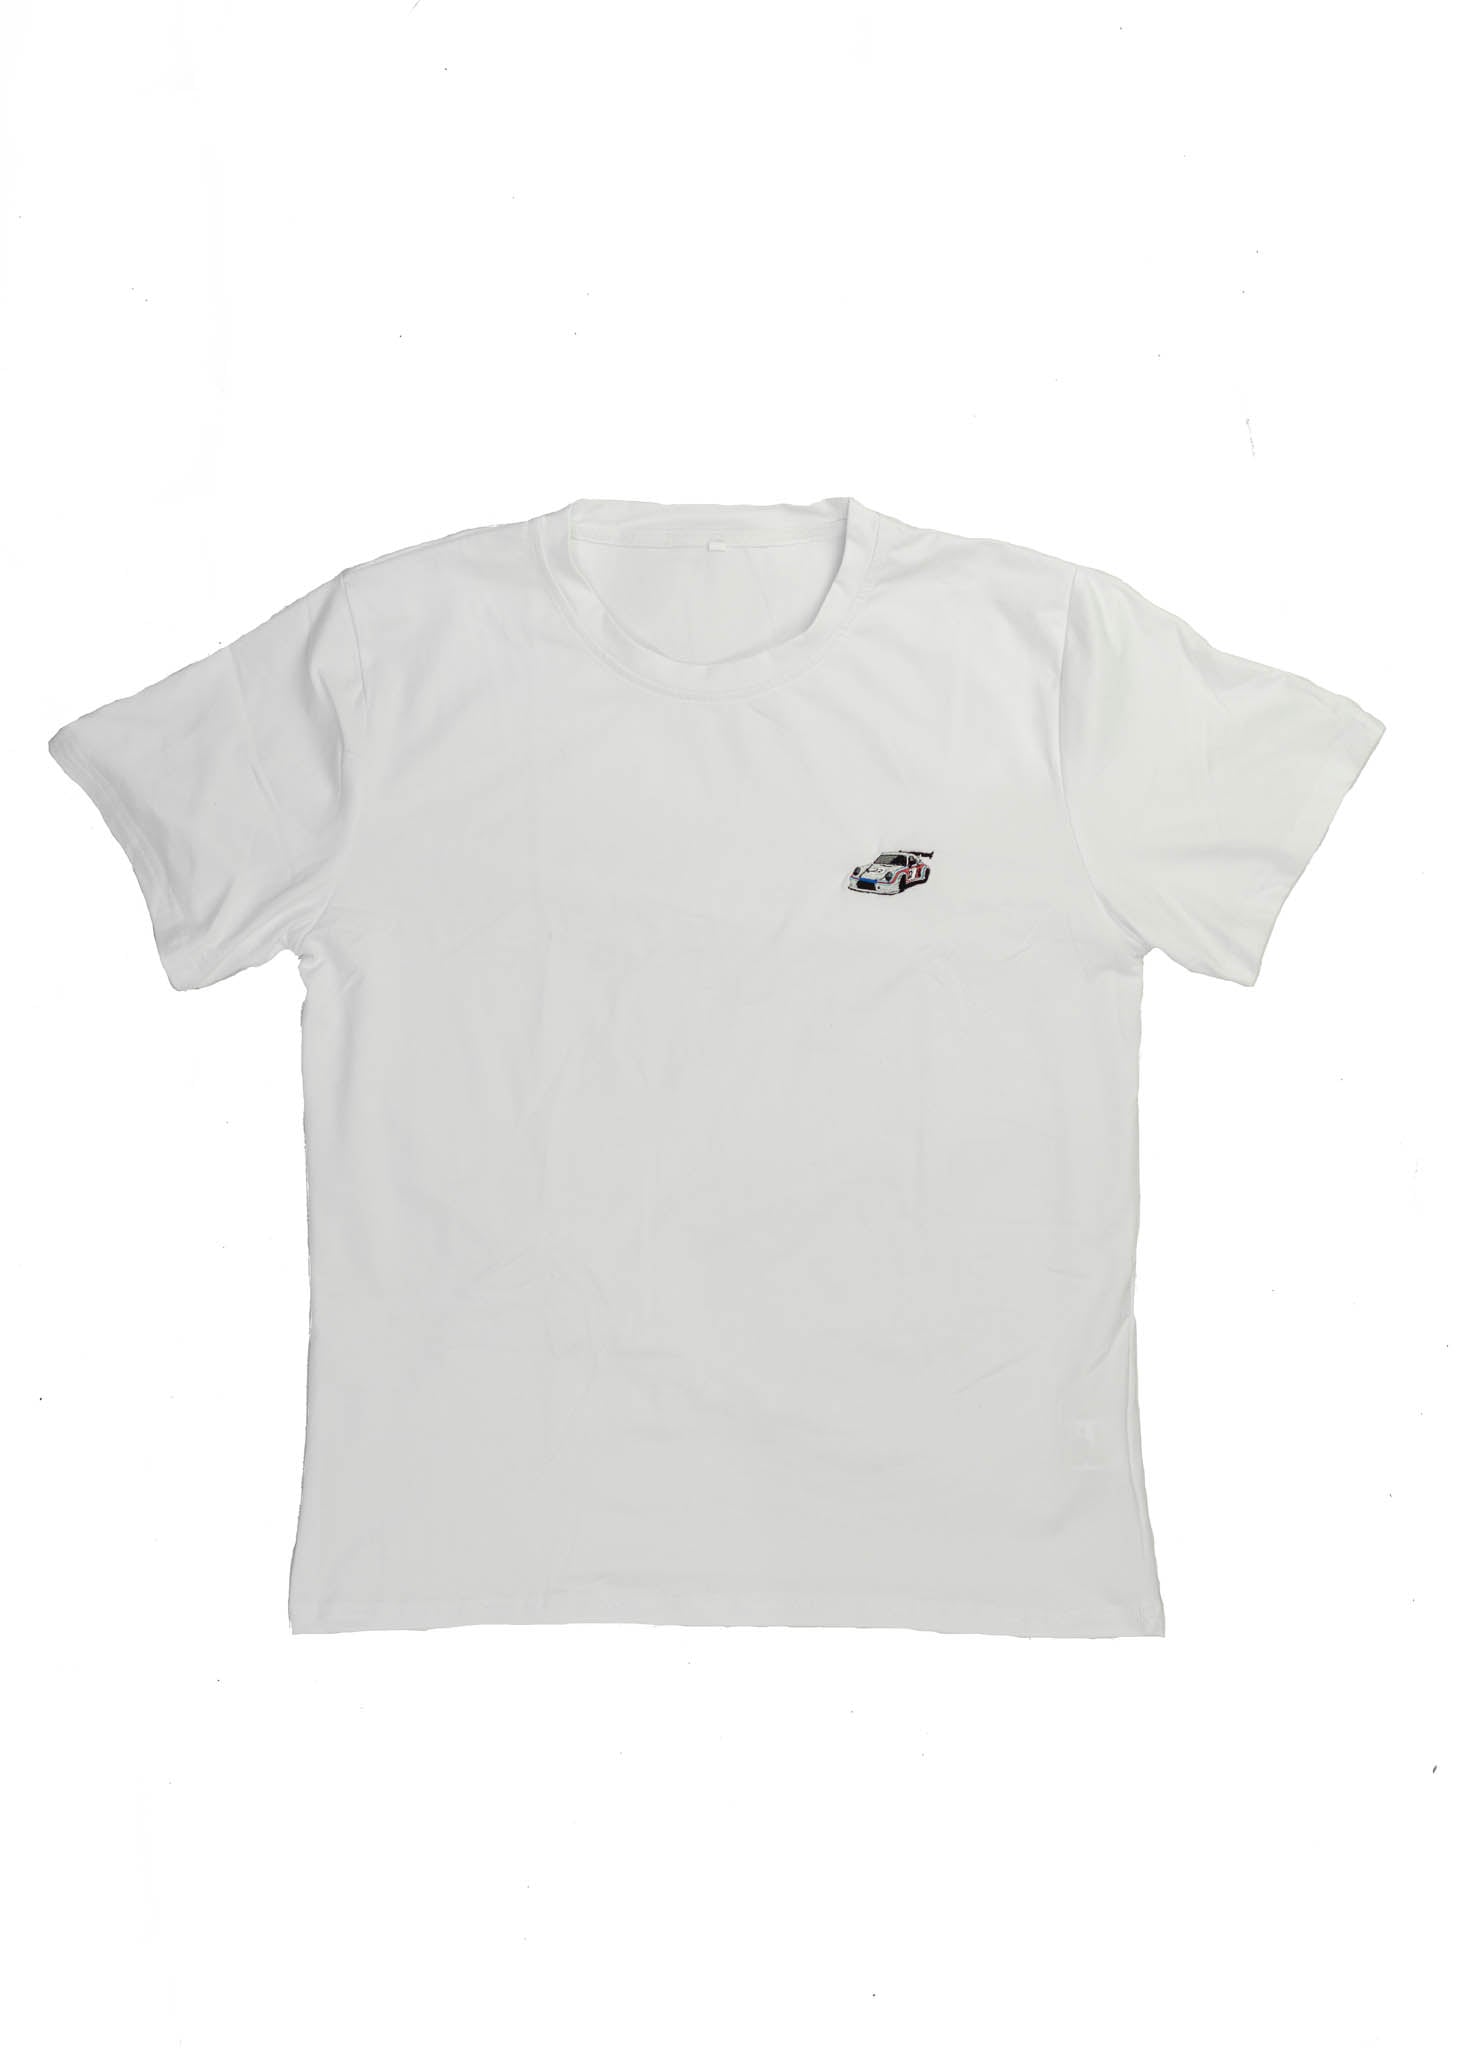 A white Porsche T-Shirt for men. Photo is the front of the shirt with an embroidered Martini R13 Porsche 911 Carrera RSR 2.1 Turbo. Fabric composition is 100% polyester. The material is very stretchy, soft, comfortable, breathable, and non-transparent. The style of this shirt is short sleeve, with a crewneck neckline.